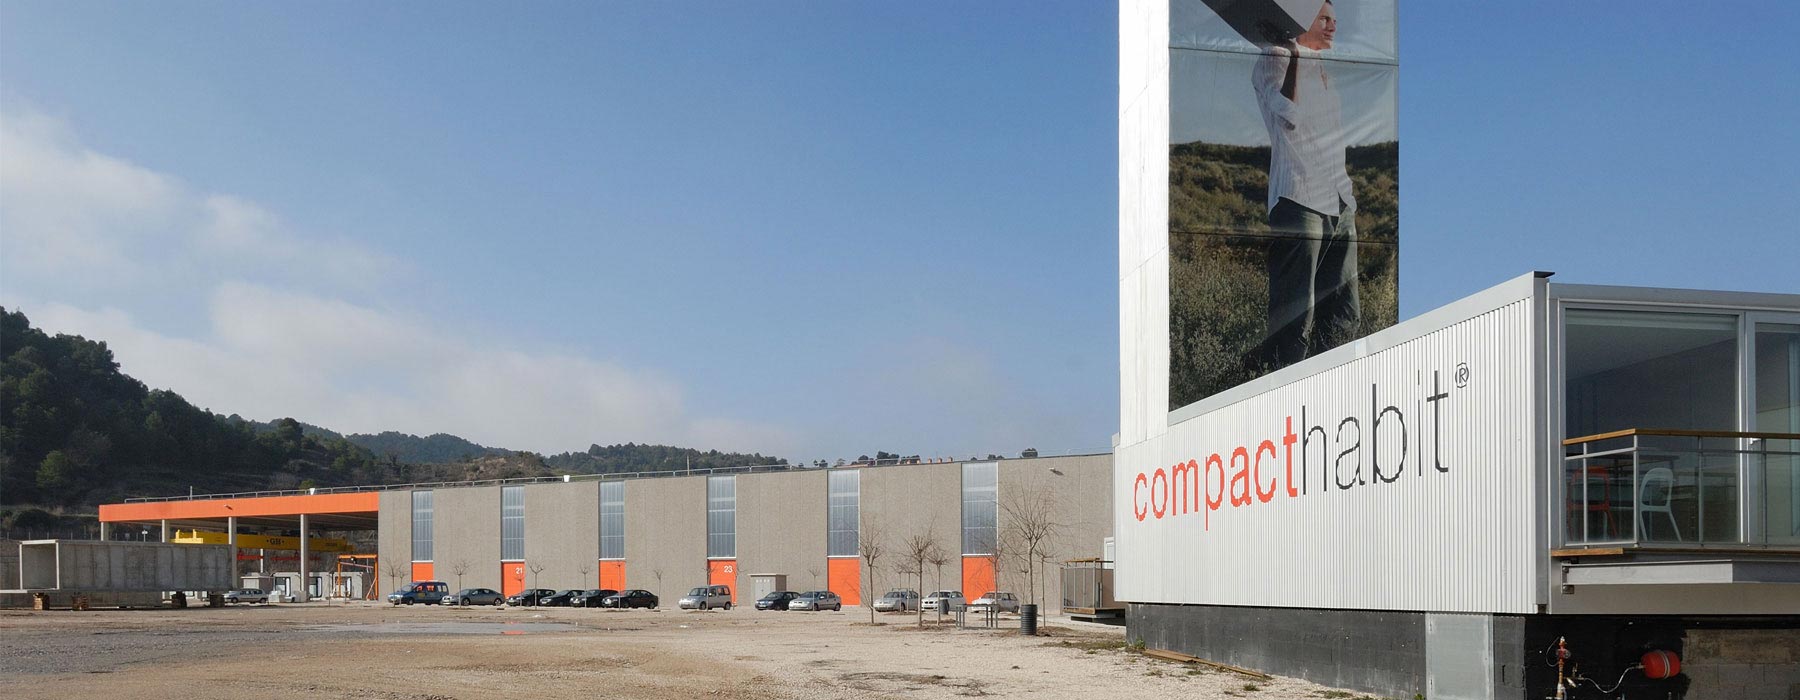 CompactHabit is founded in 2004 and located in Cardona Barcelona ubicación